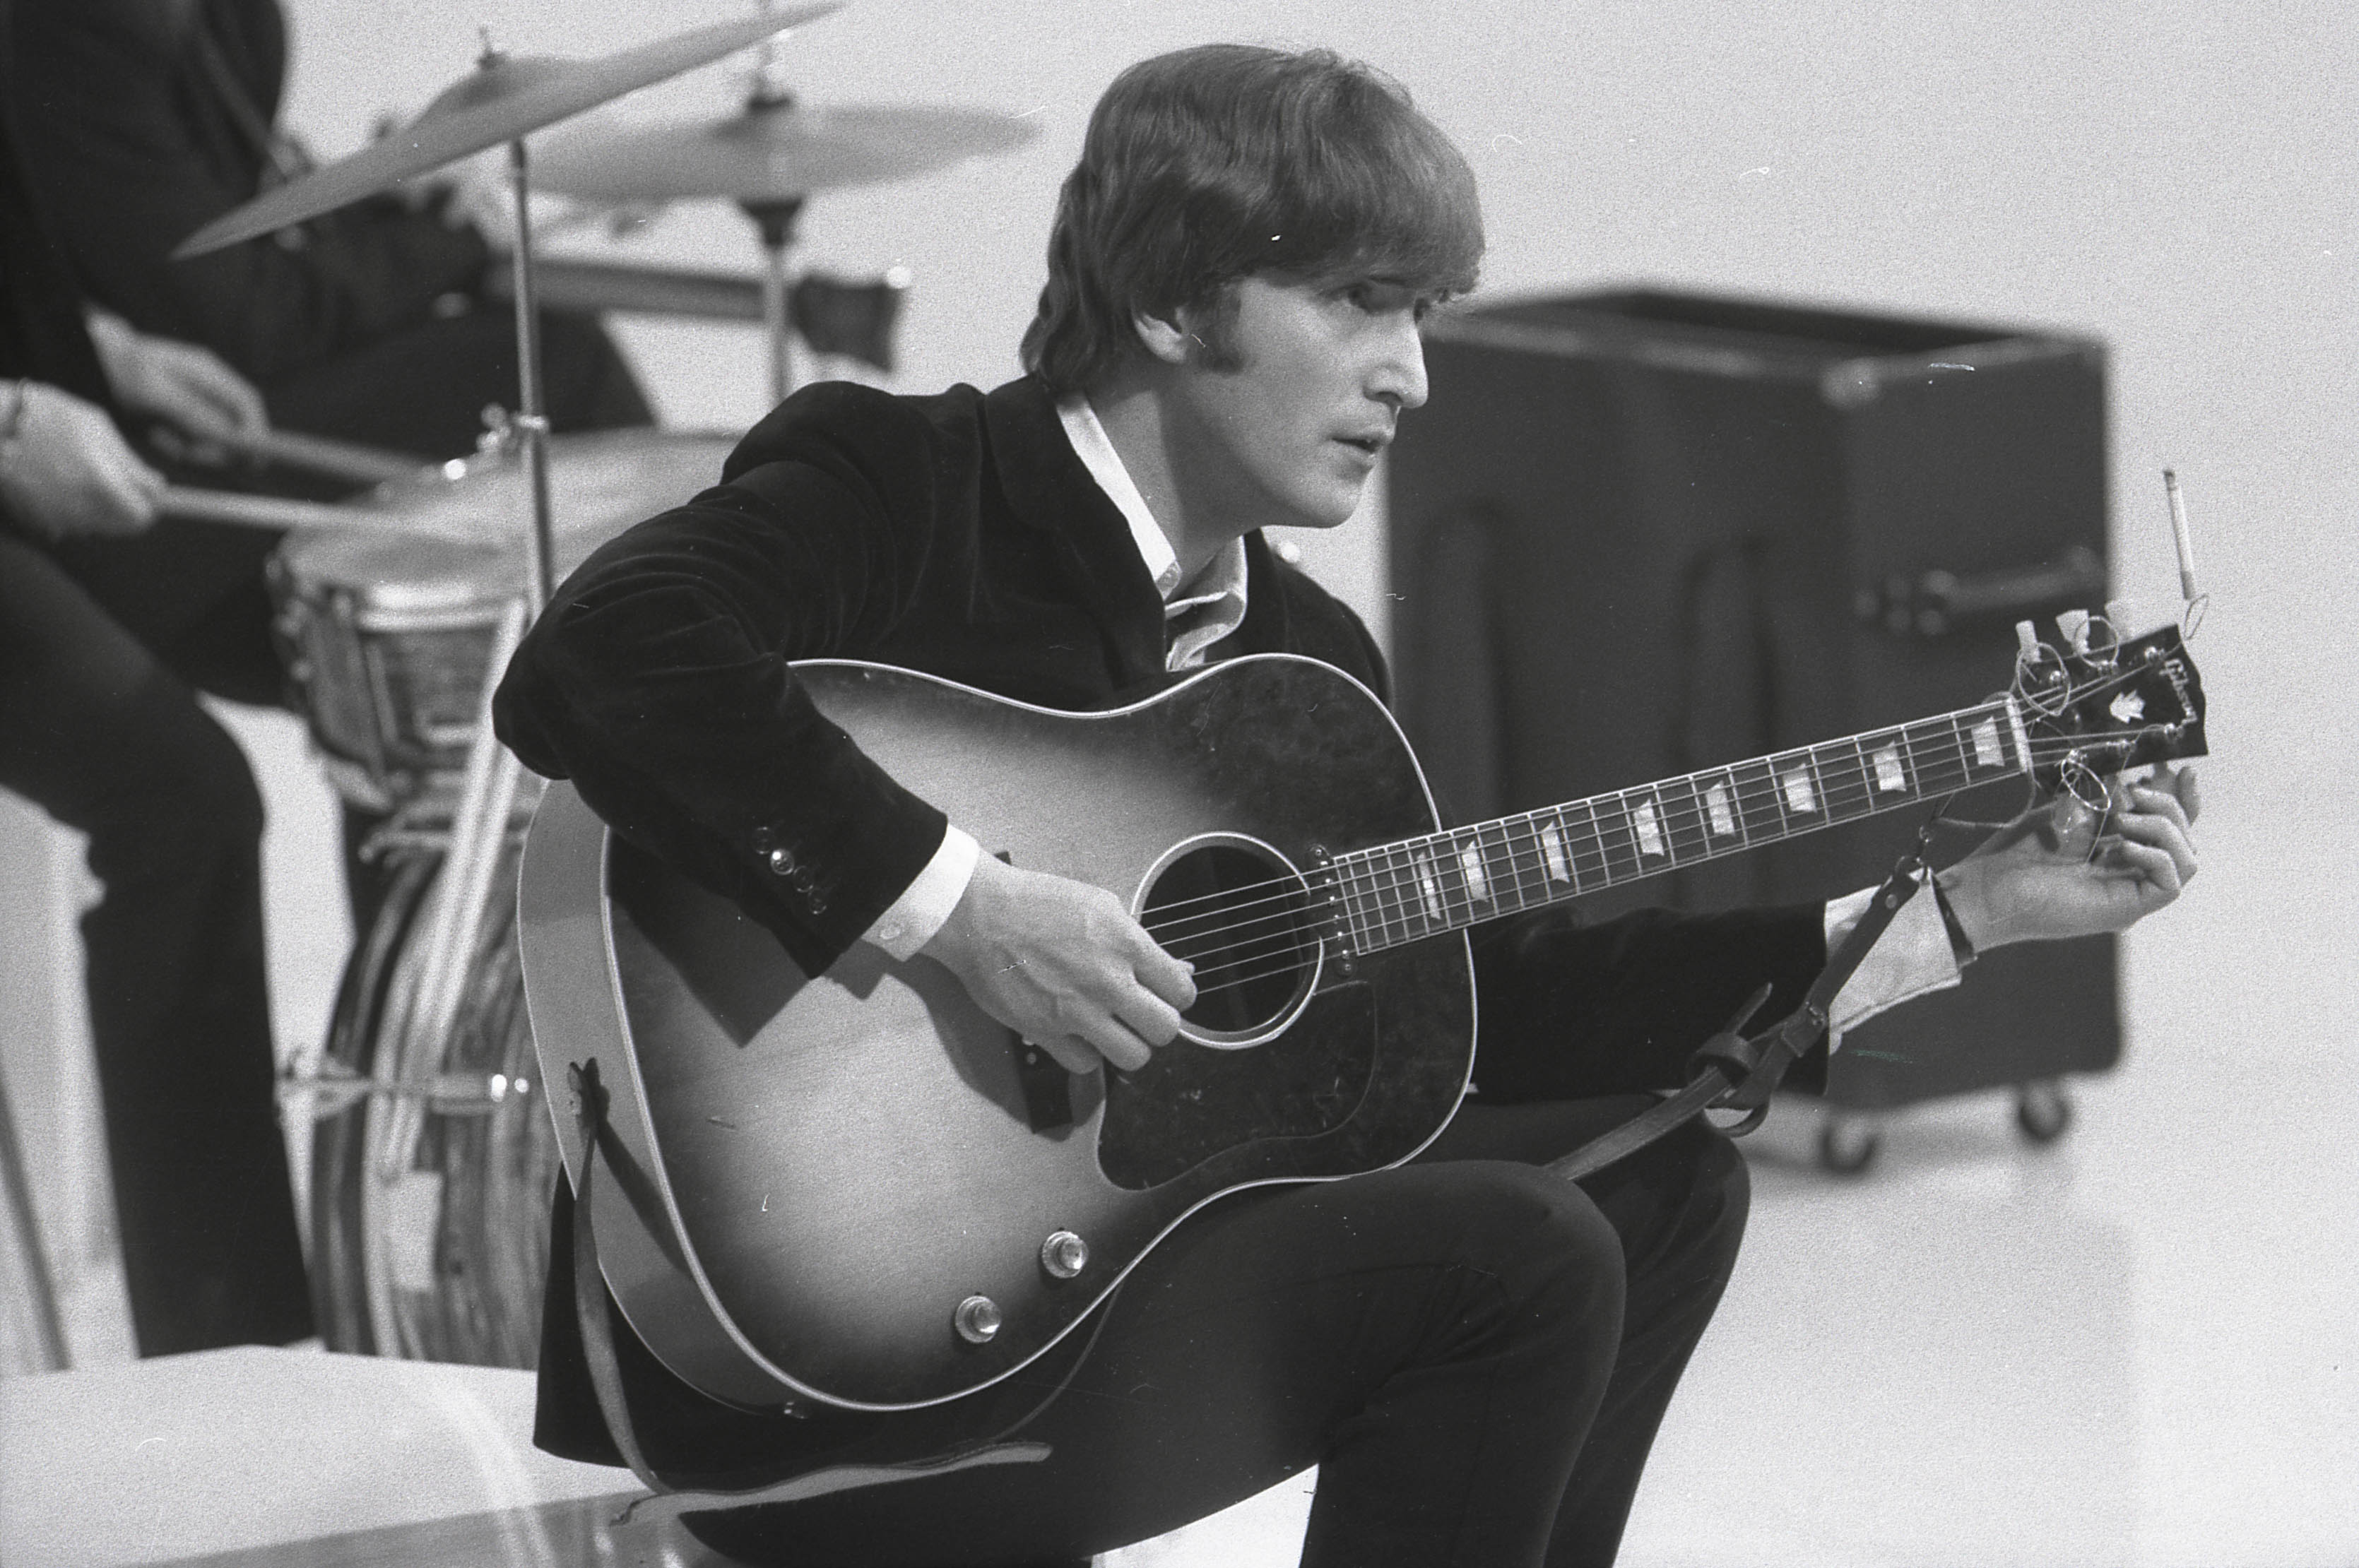 The Beatles and John Lennon of the Beatles, tuning guitar during the filming of 'A Hard Day's Night'